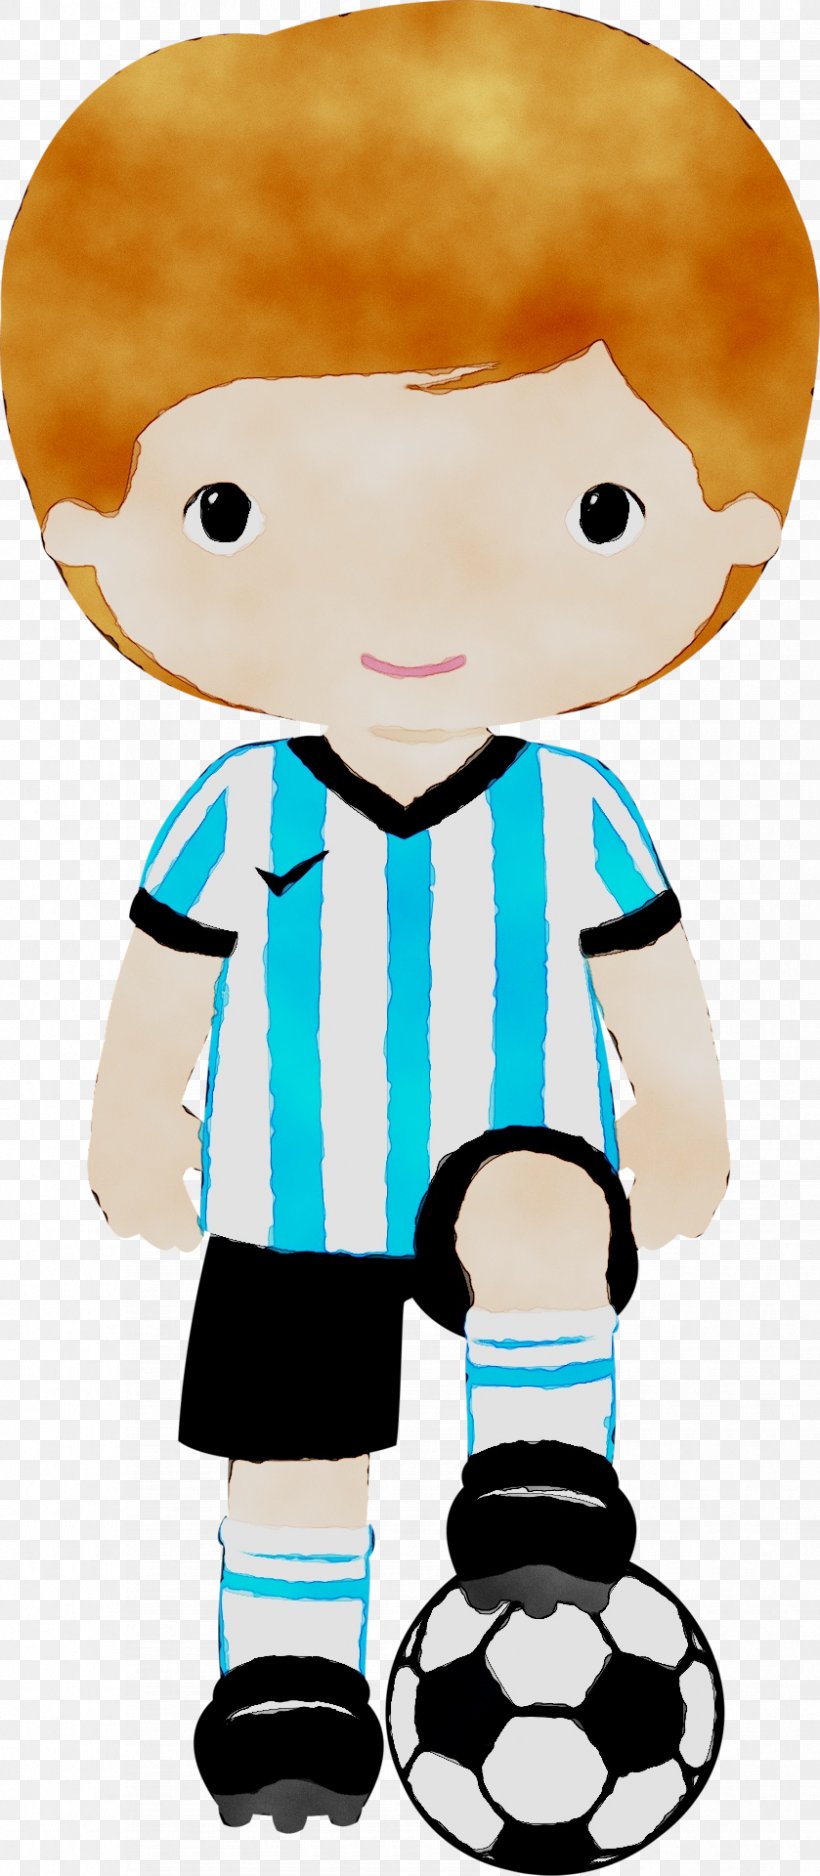 Football Player Sports Athlete Clip Art, PNG, 839x1920px, Football, Argentina National Football Team, Athlete, Ball, Cartoon Download Free